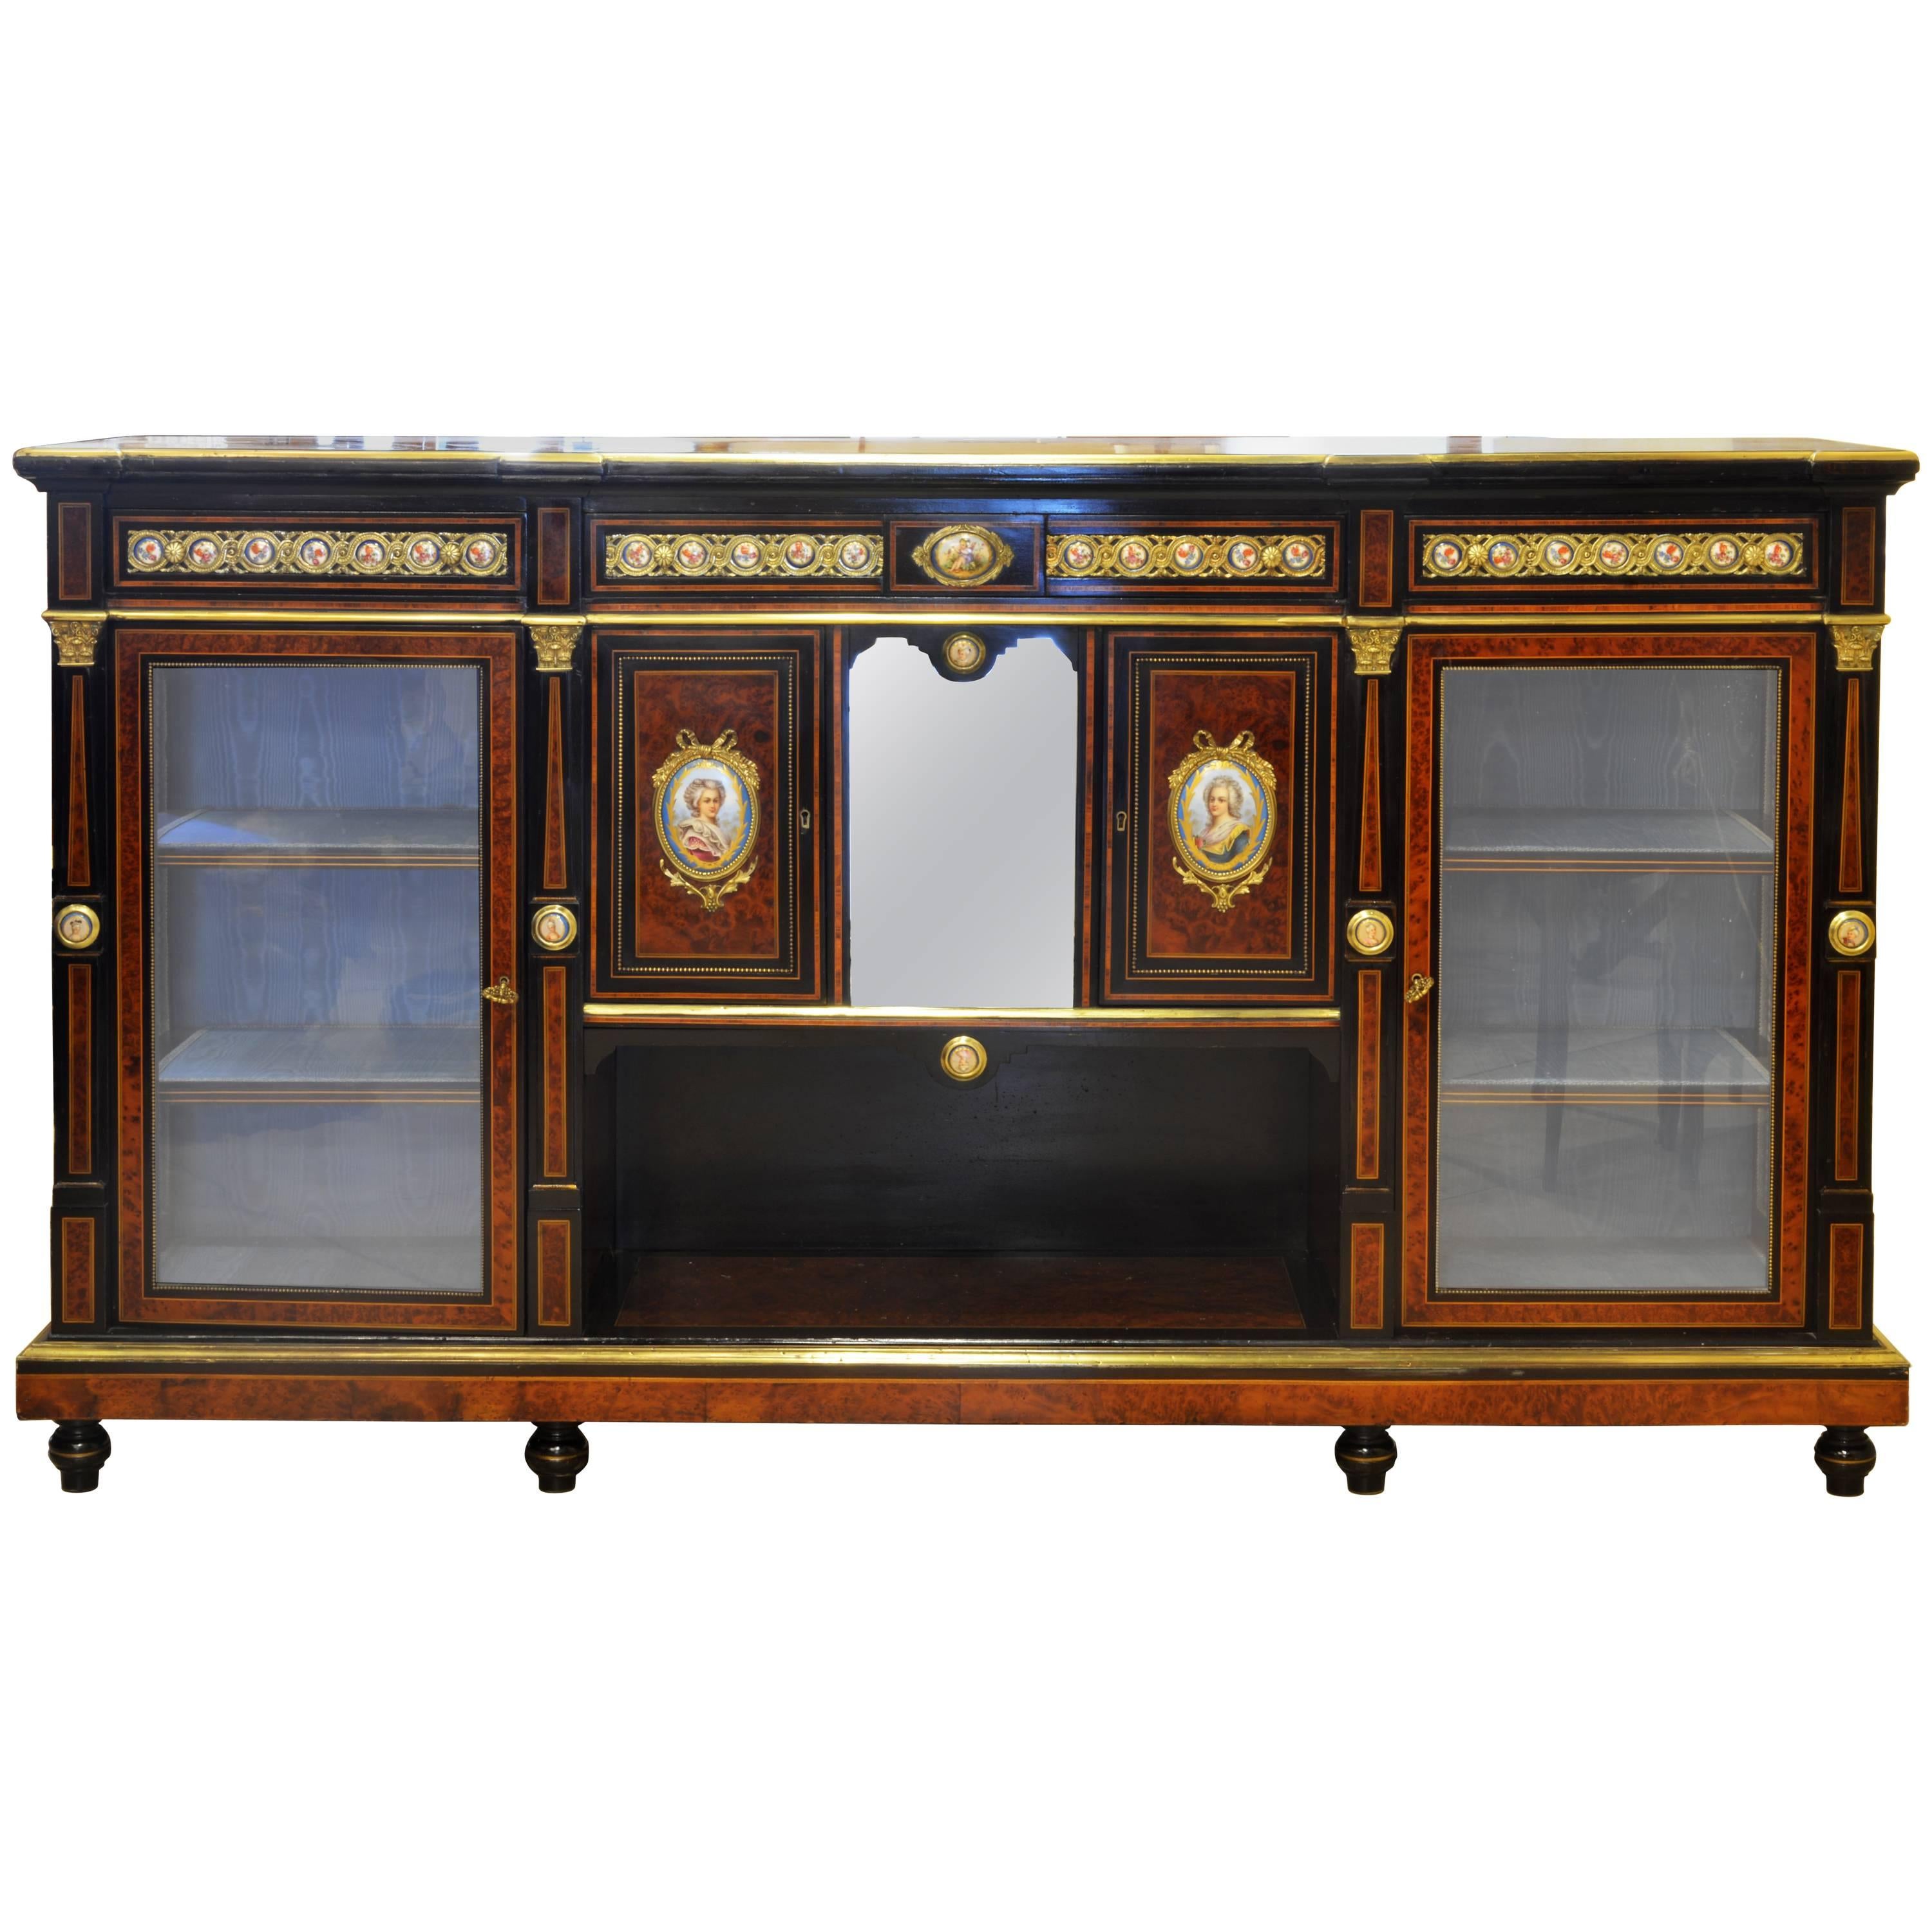 English 19th Cent. Ormolu and Sevres Plaque Mounted Inlaid Burl Walnut Credenza